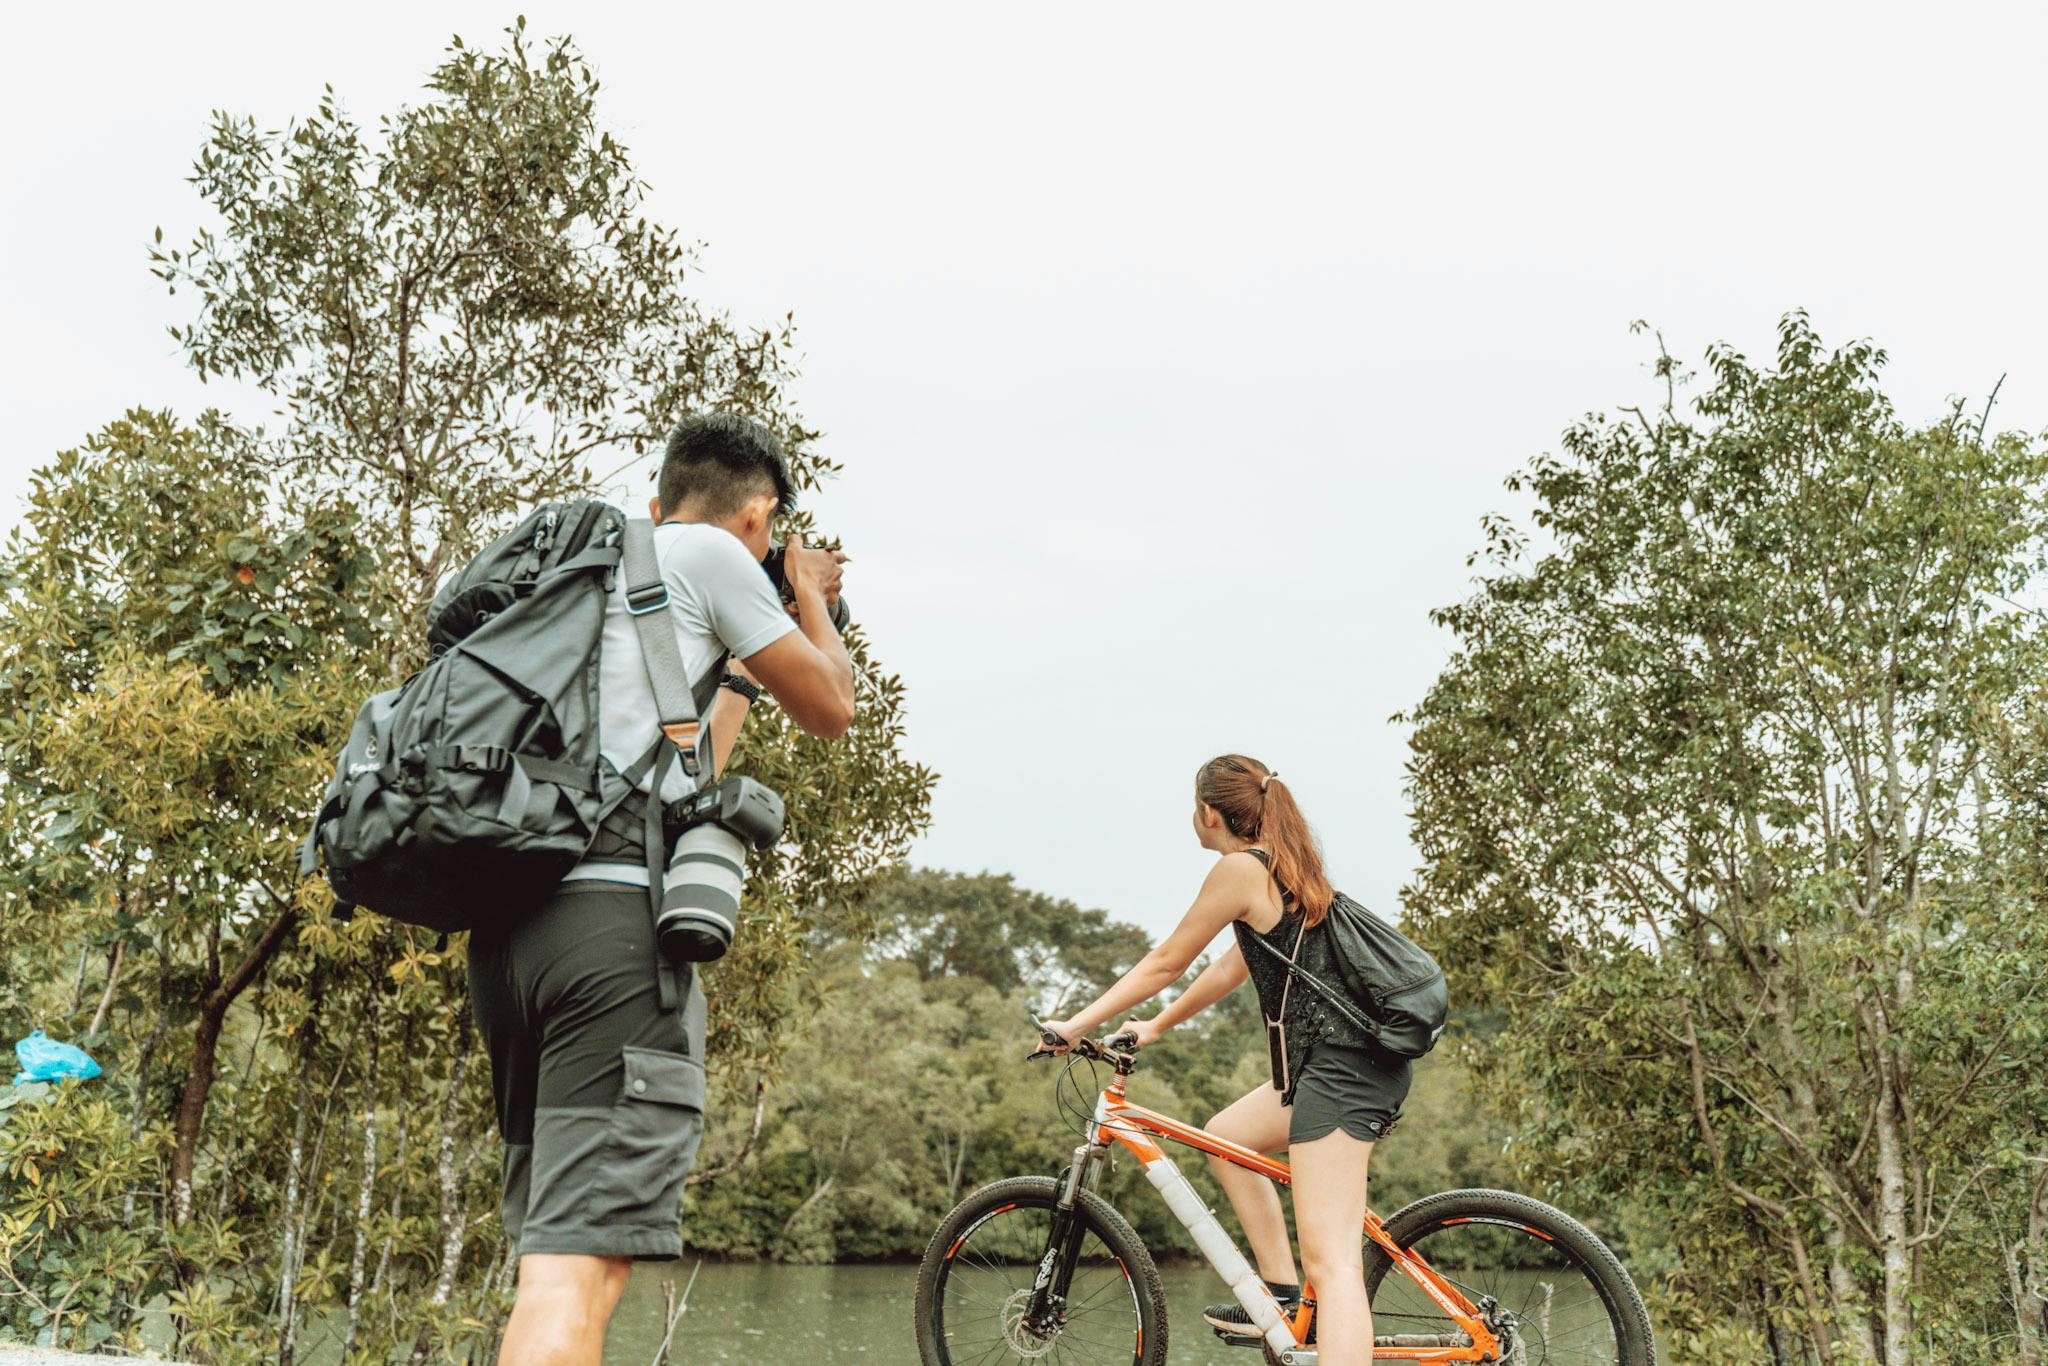 Get your cameras ready during your Ubin cycling trip! You never know what you'll find